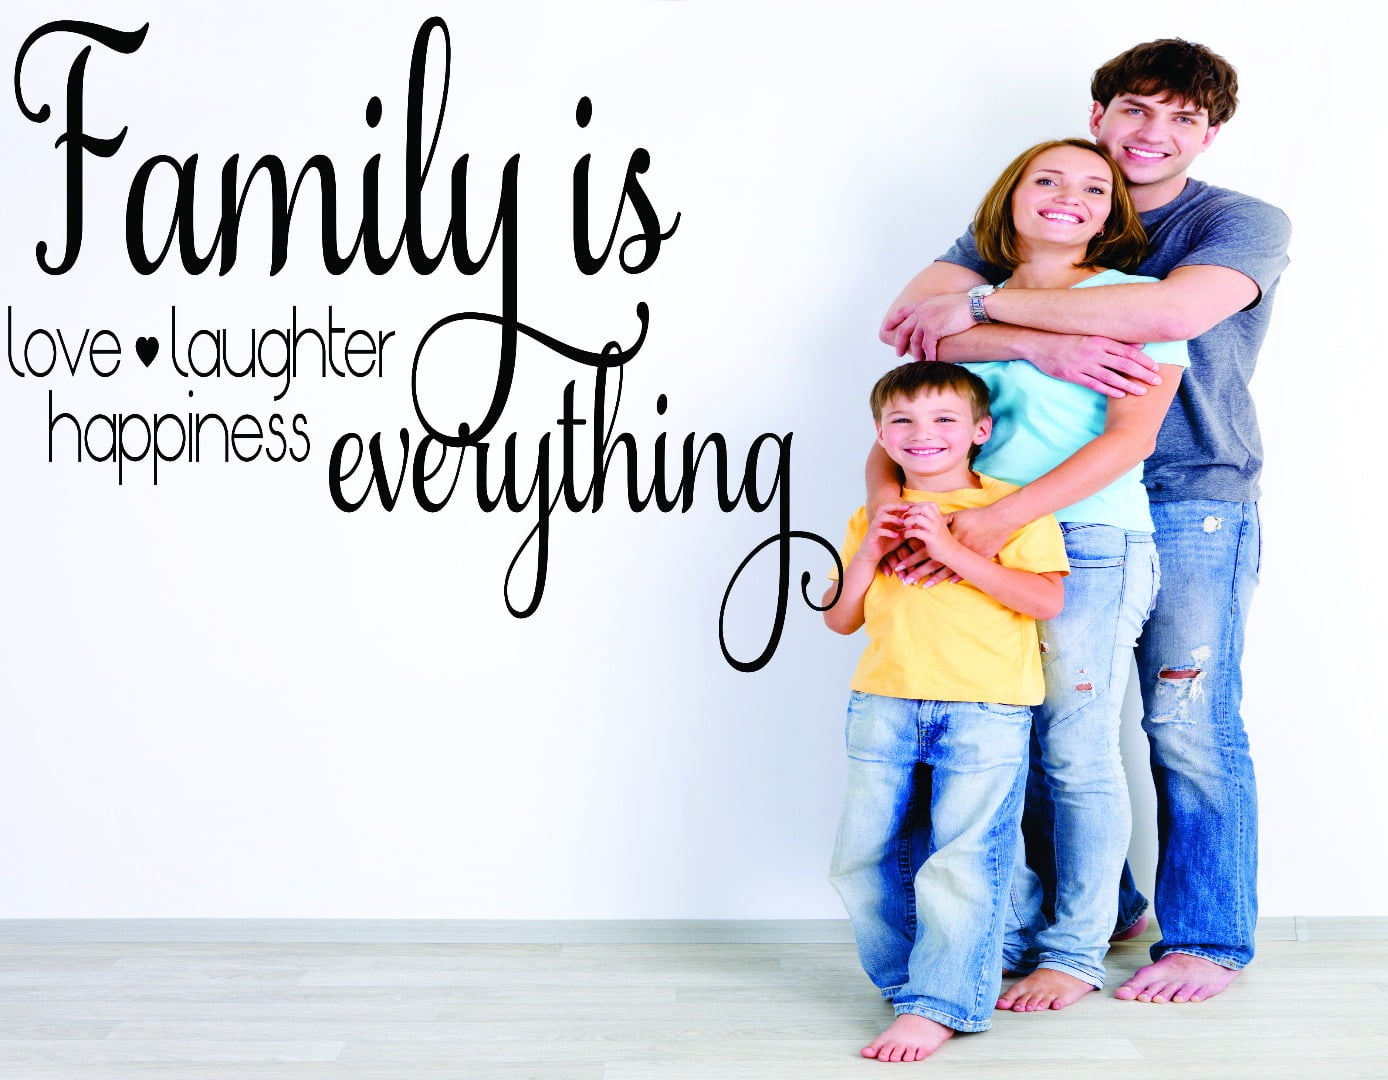 Happy laughter of children and Joy in every Family quotes. Family is everything